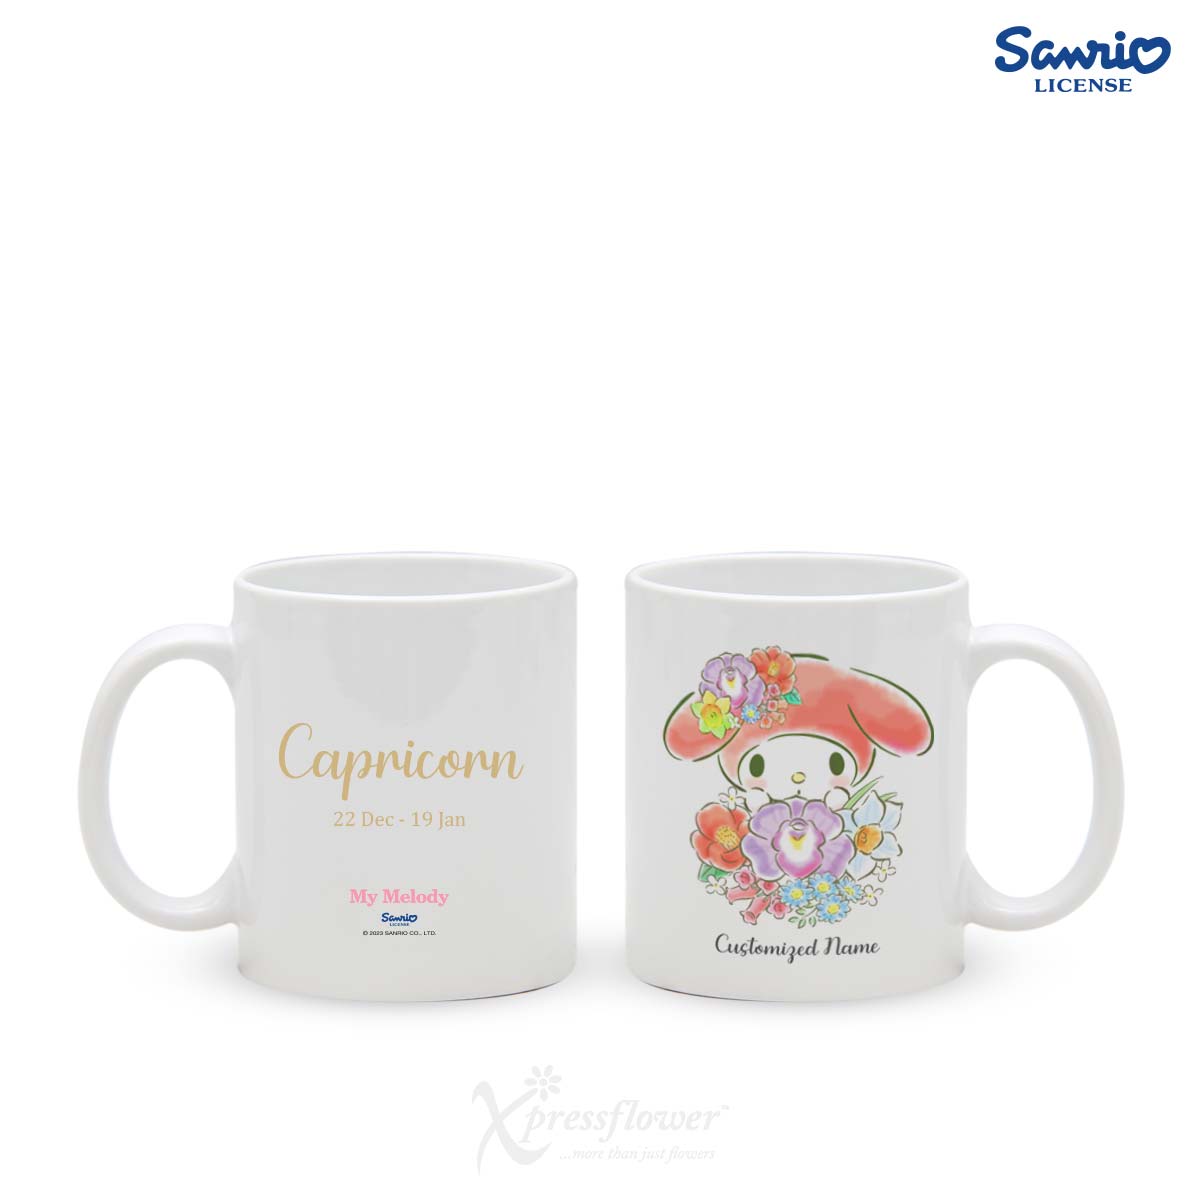 SNMG2309_Capricorn Creations 6 Pink Carnations with My Melody Personalised Mug Capricorn 1c